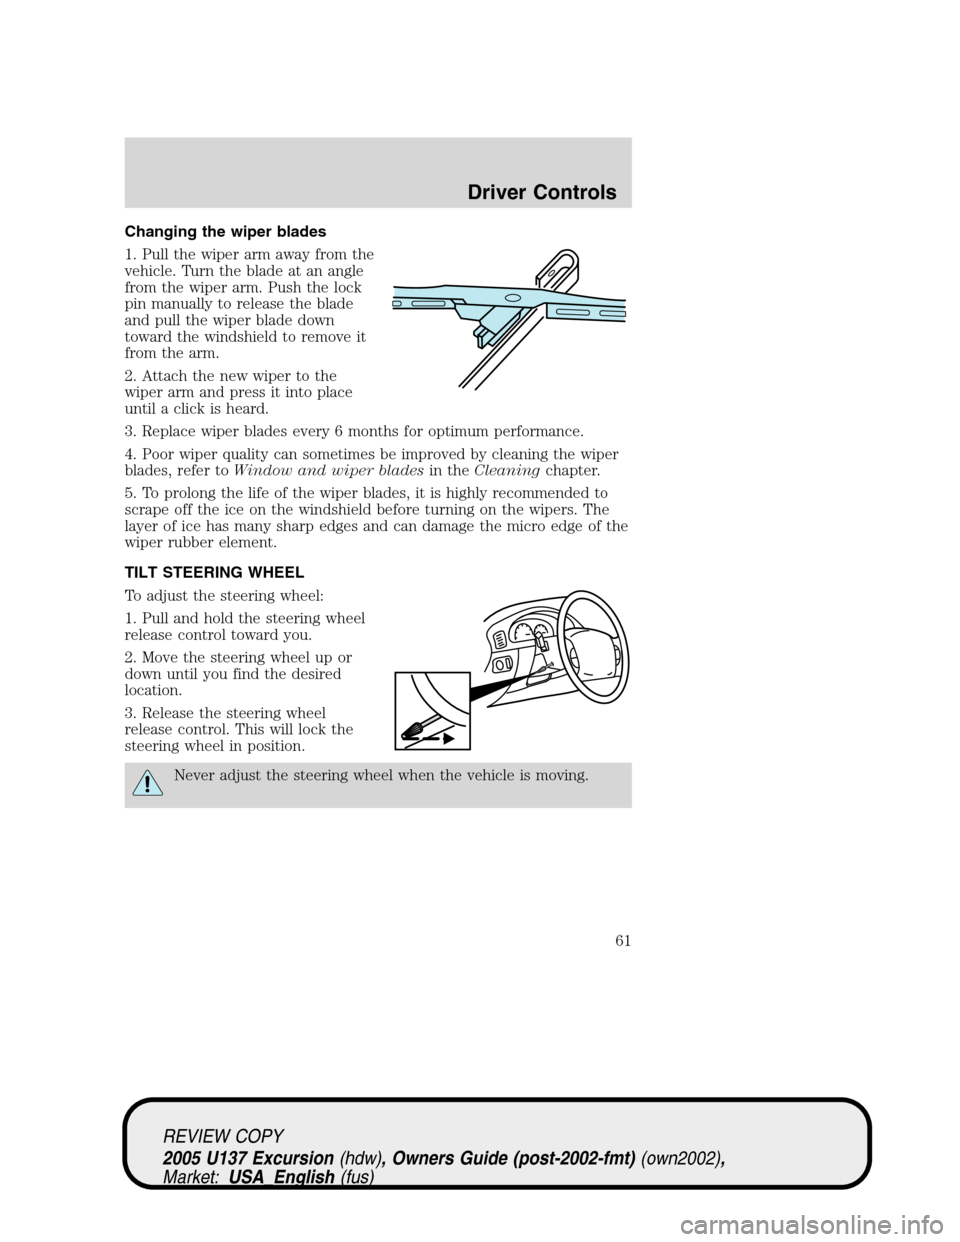 FORD EXCURSION 2005 1.G Owners Manual Changing the wiper blades
1. Pull the wiper arm away from the
vehicle. Turn the blade at an angle
from the wiper arm. Push the lock
pin manually to release the blade
and pull the wiper blade down
towa